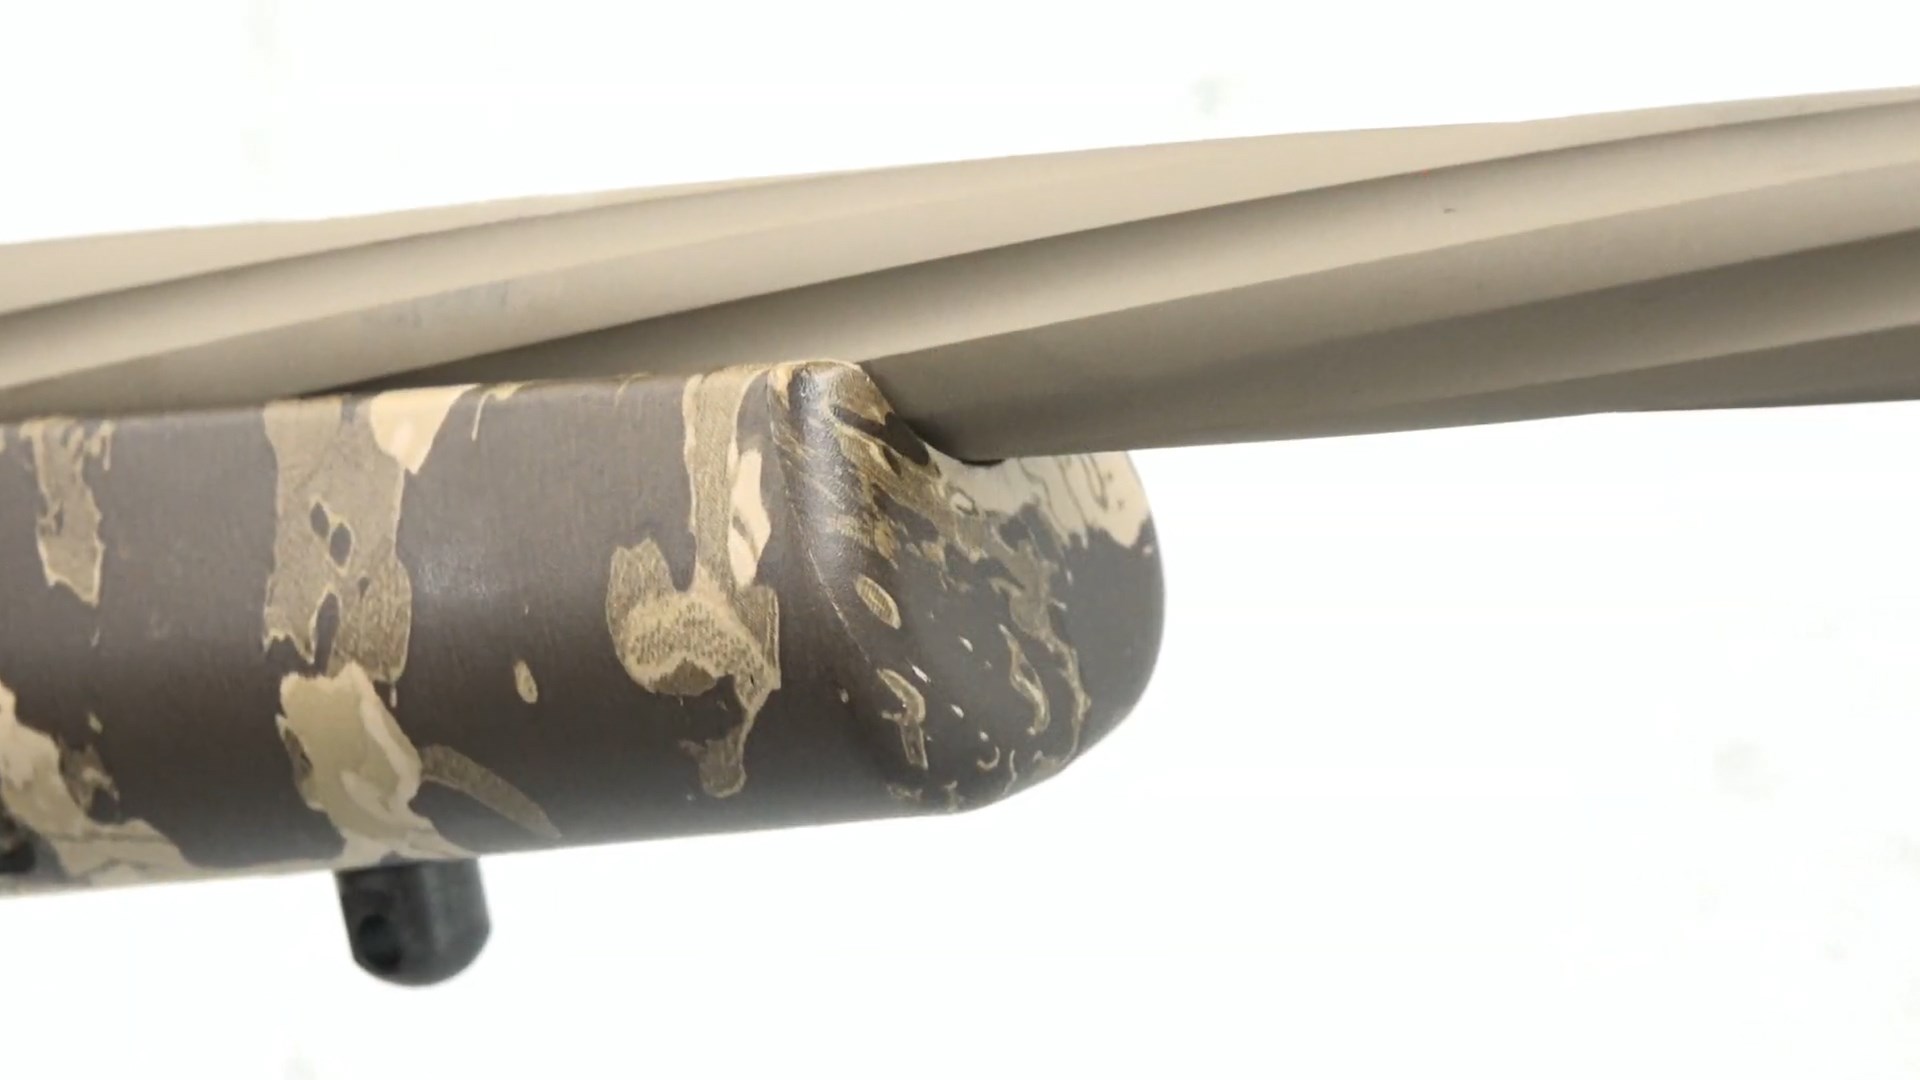 Weatherby Vanguard bolt-action rifle barrel closeup fluting spiral camouflage fore-end stock